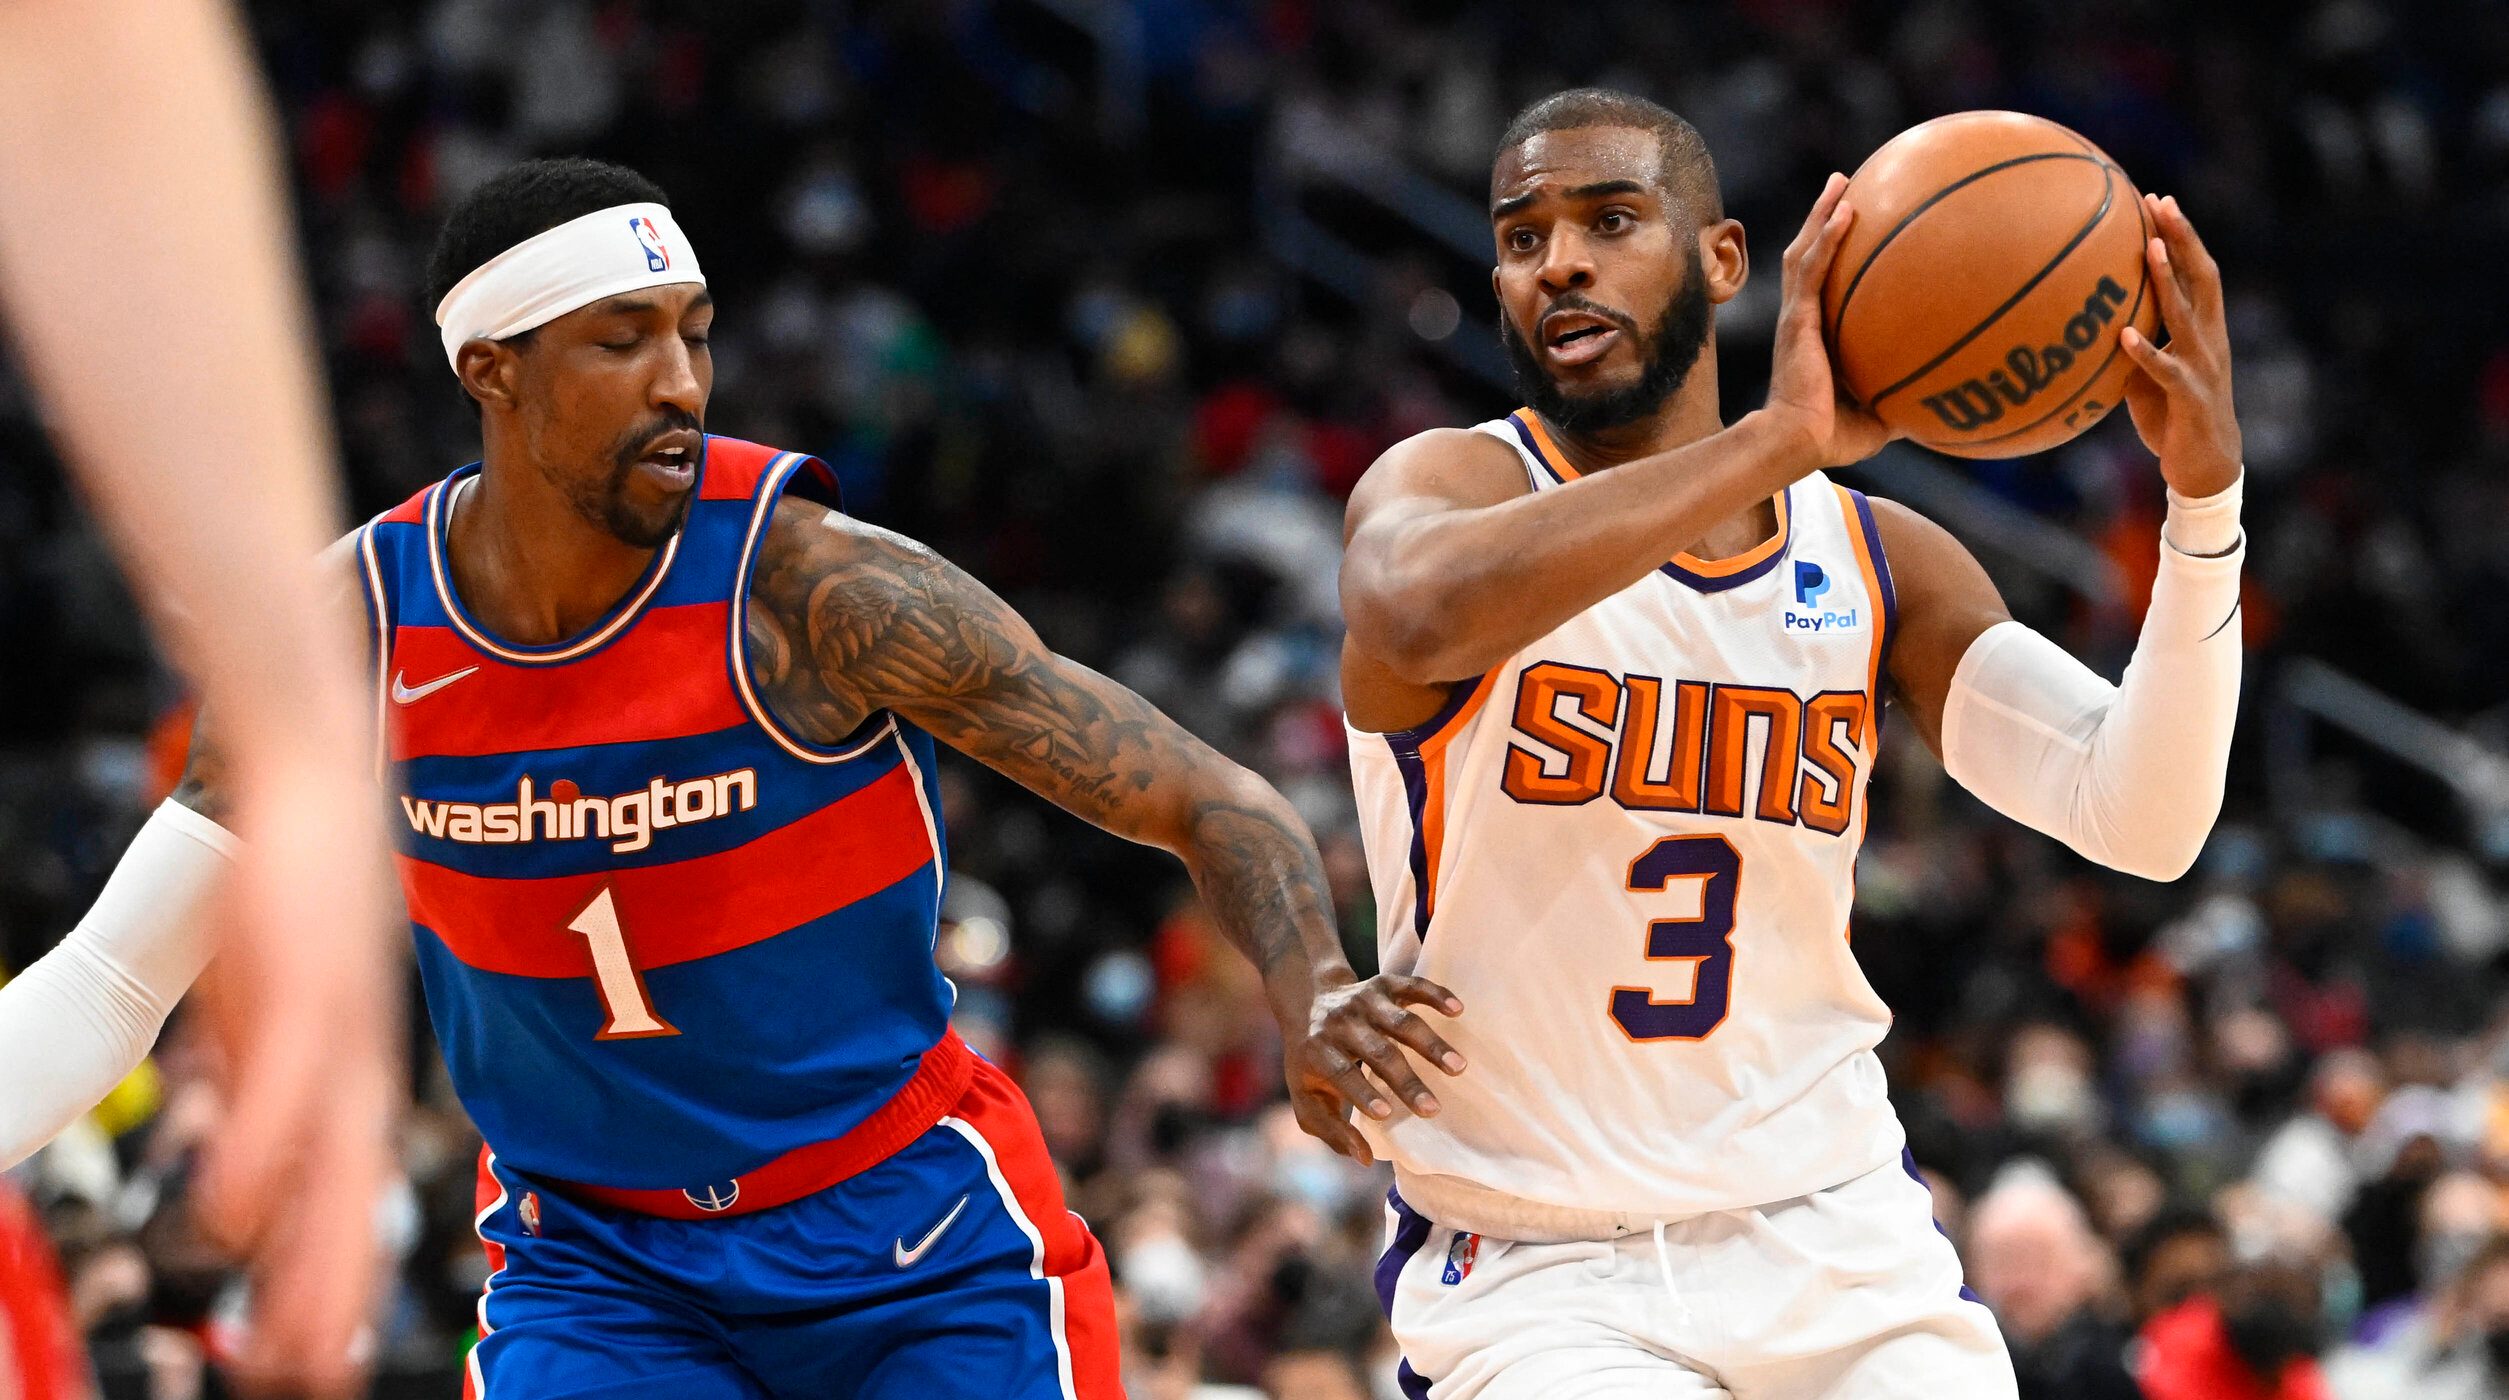 Suns bounce back from rare loss by routing Wizards